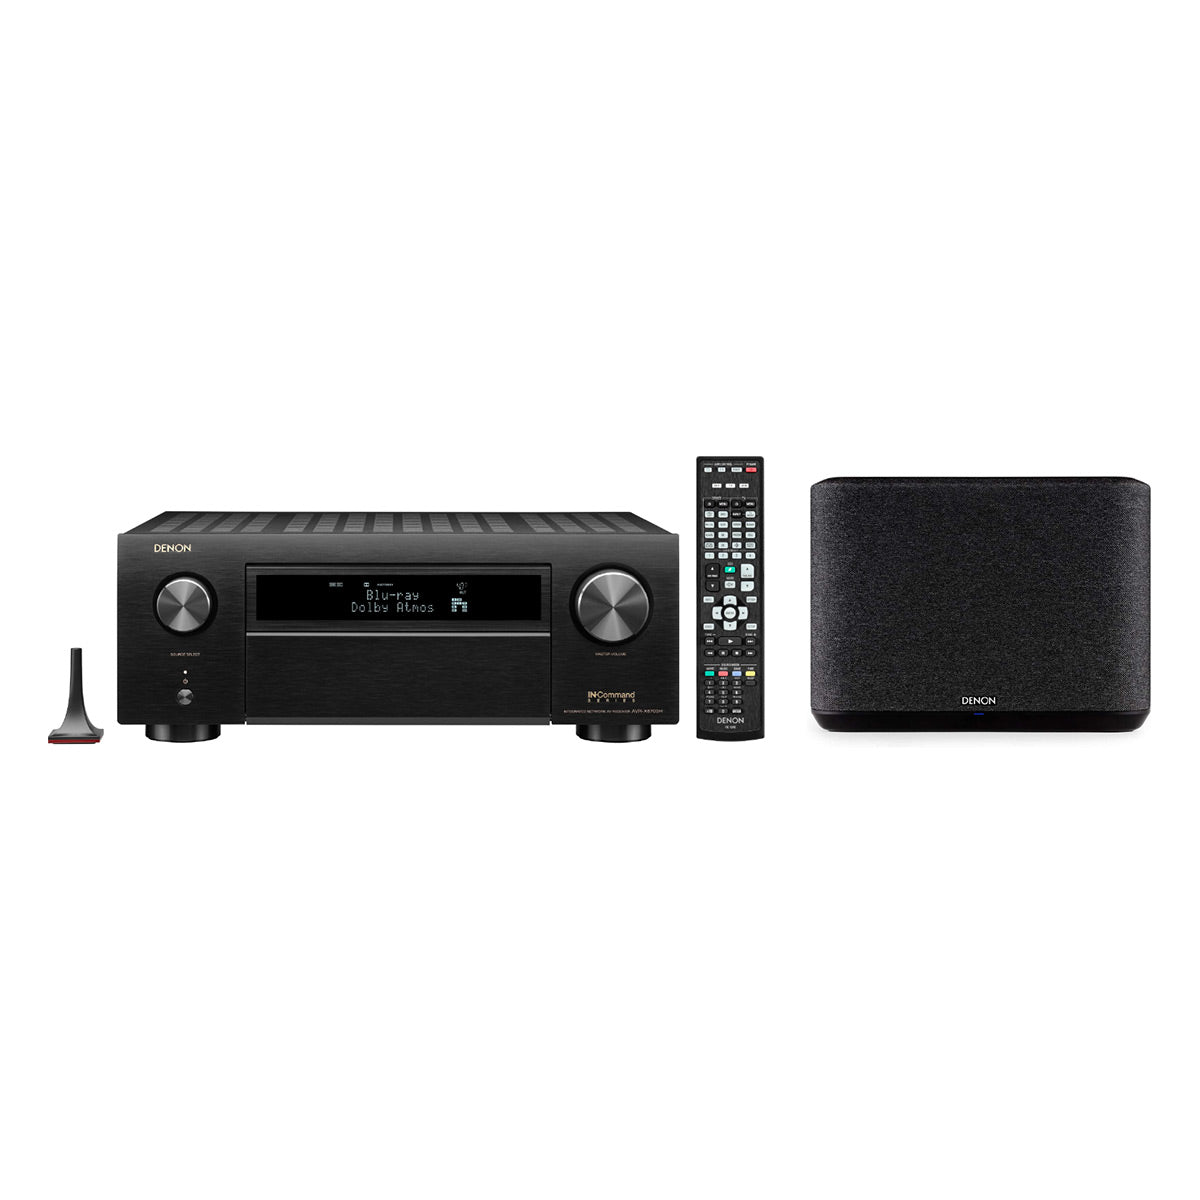 Denon AVR-X6700H 11.2-Channel 8K AV Receiver with 3D Audio and Amazon Alexa Voice Control with Denon Home 250 Wireless Streaming Speaker (Black)